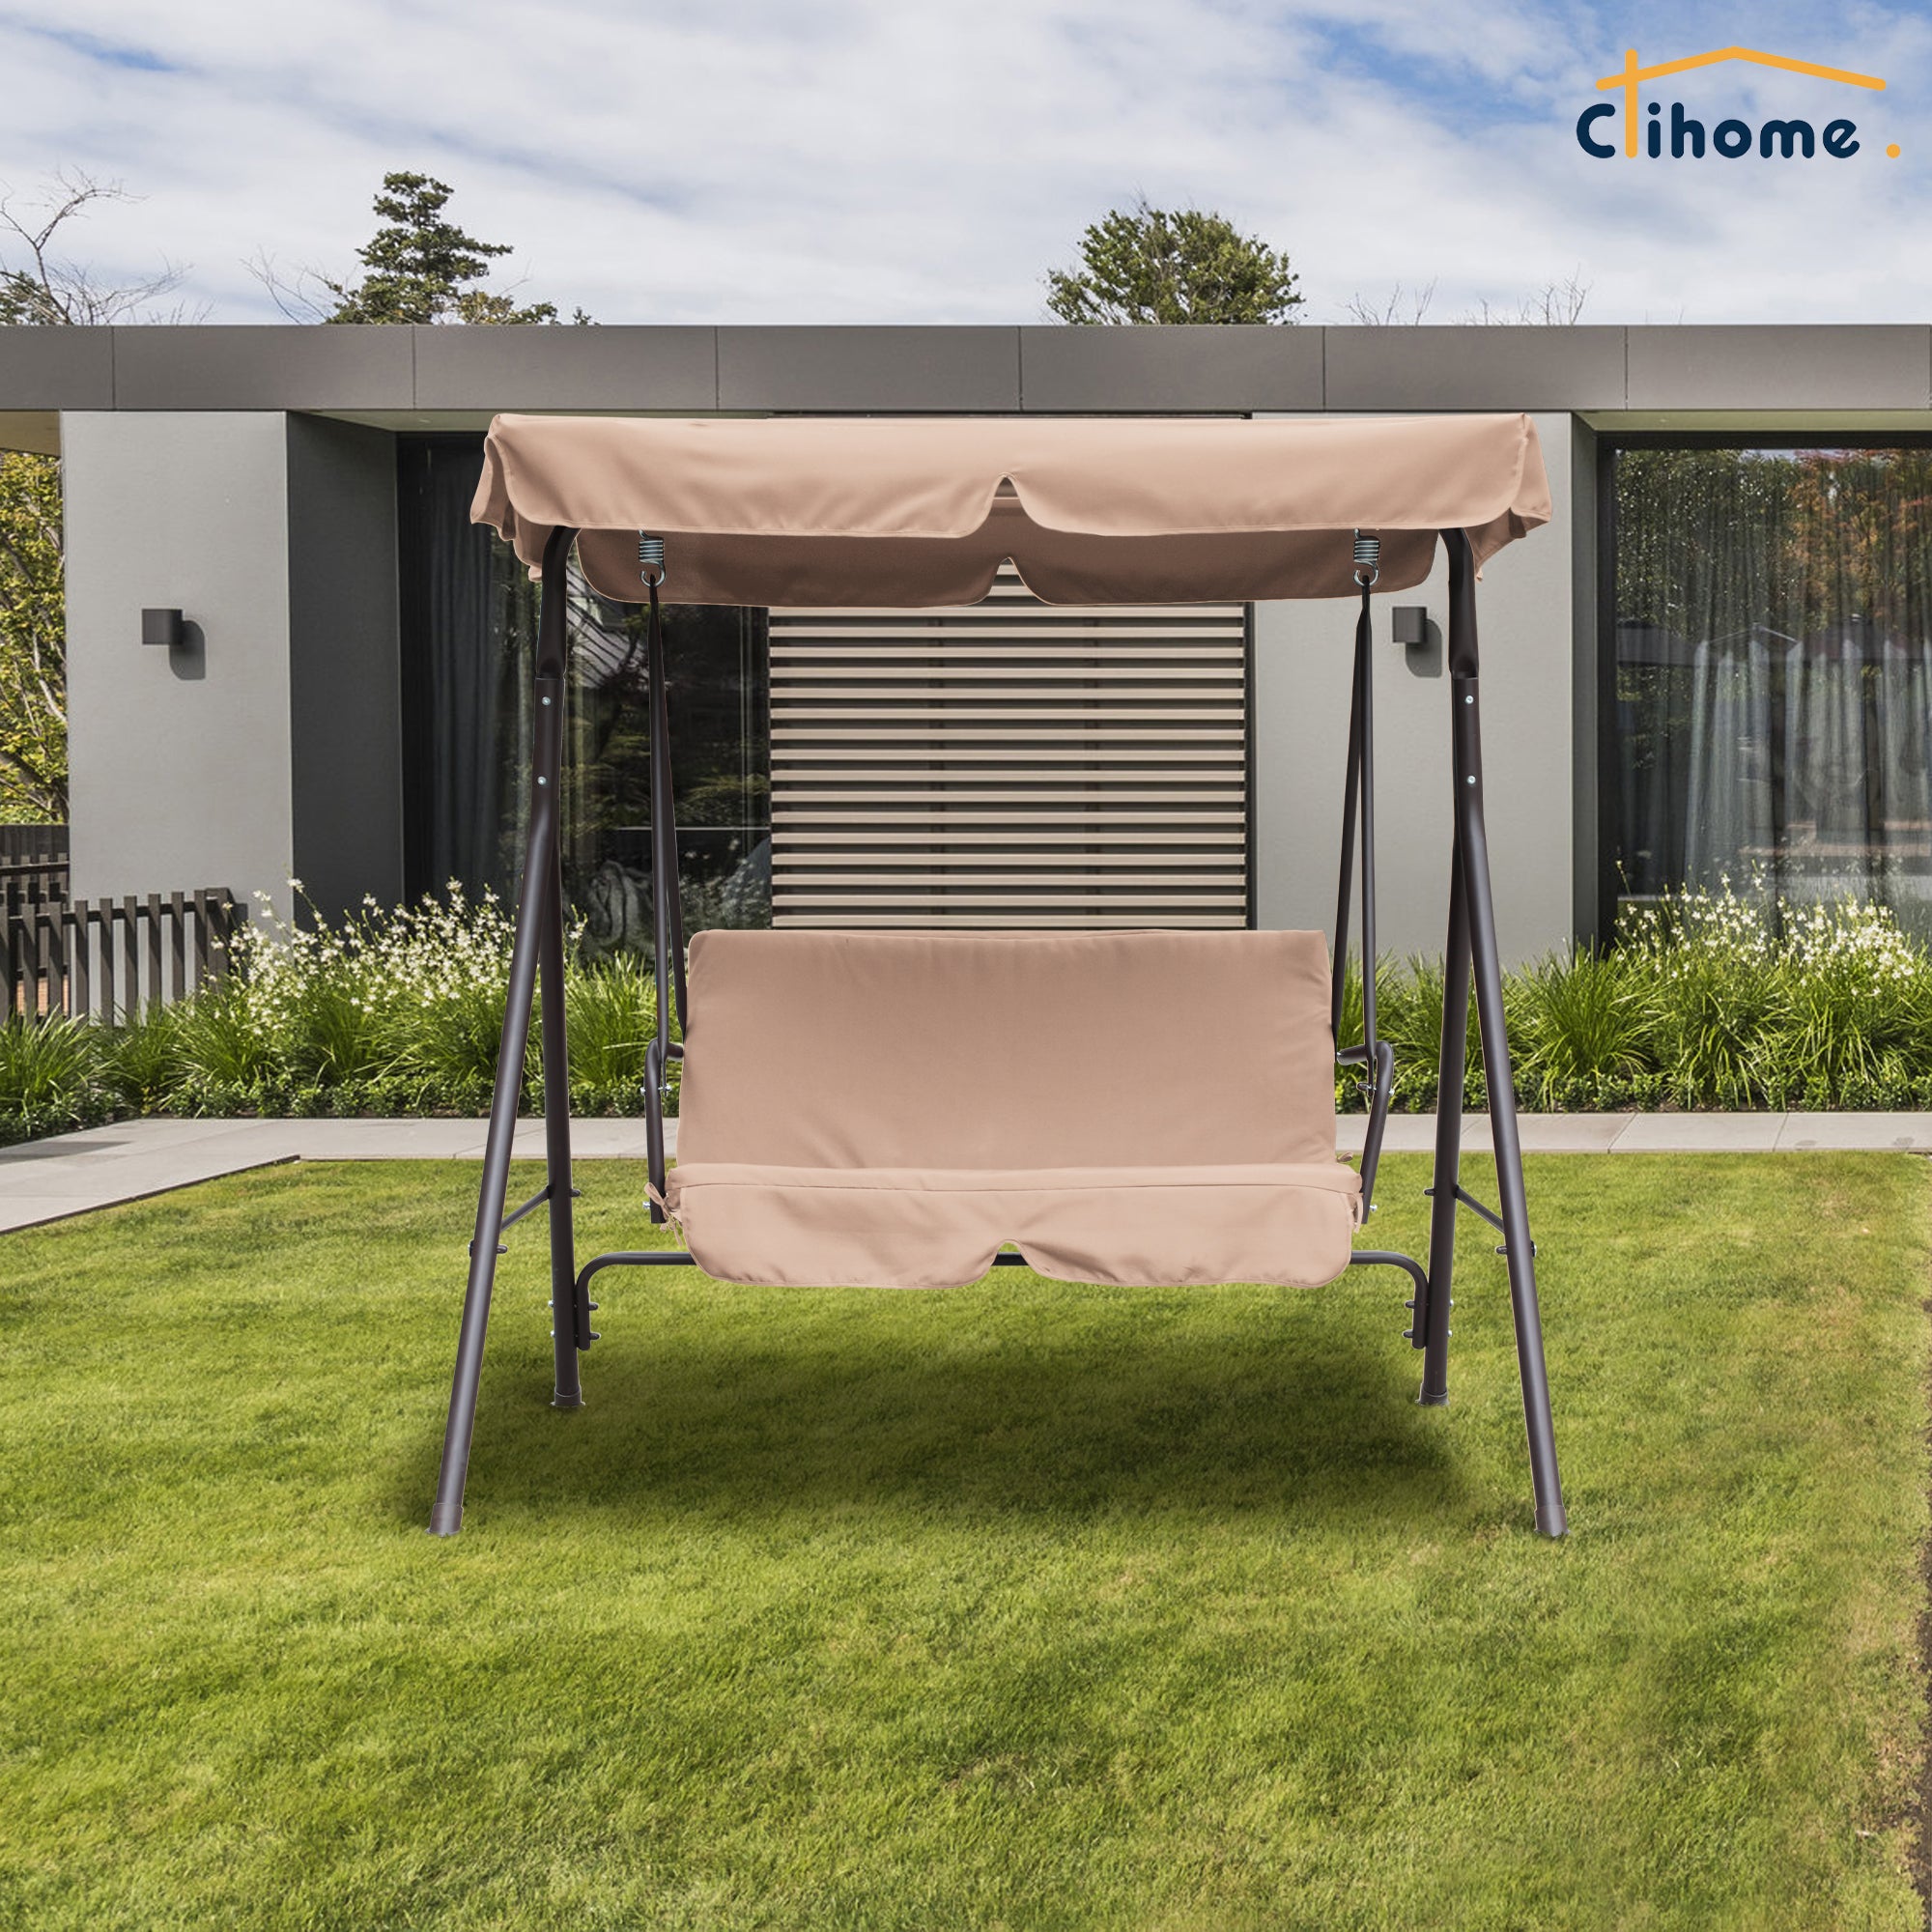 Clihome Steel 2-Person Outdoor Canopy Swing Patio Swing Chair, Porch Swing with Removable Cushion and Convertible Canopy